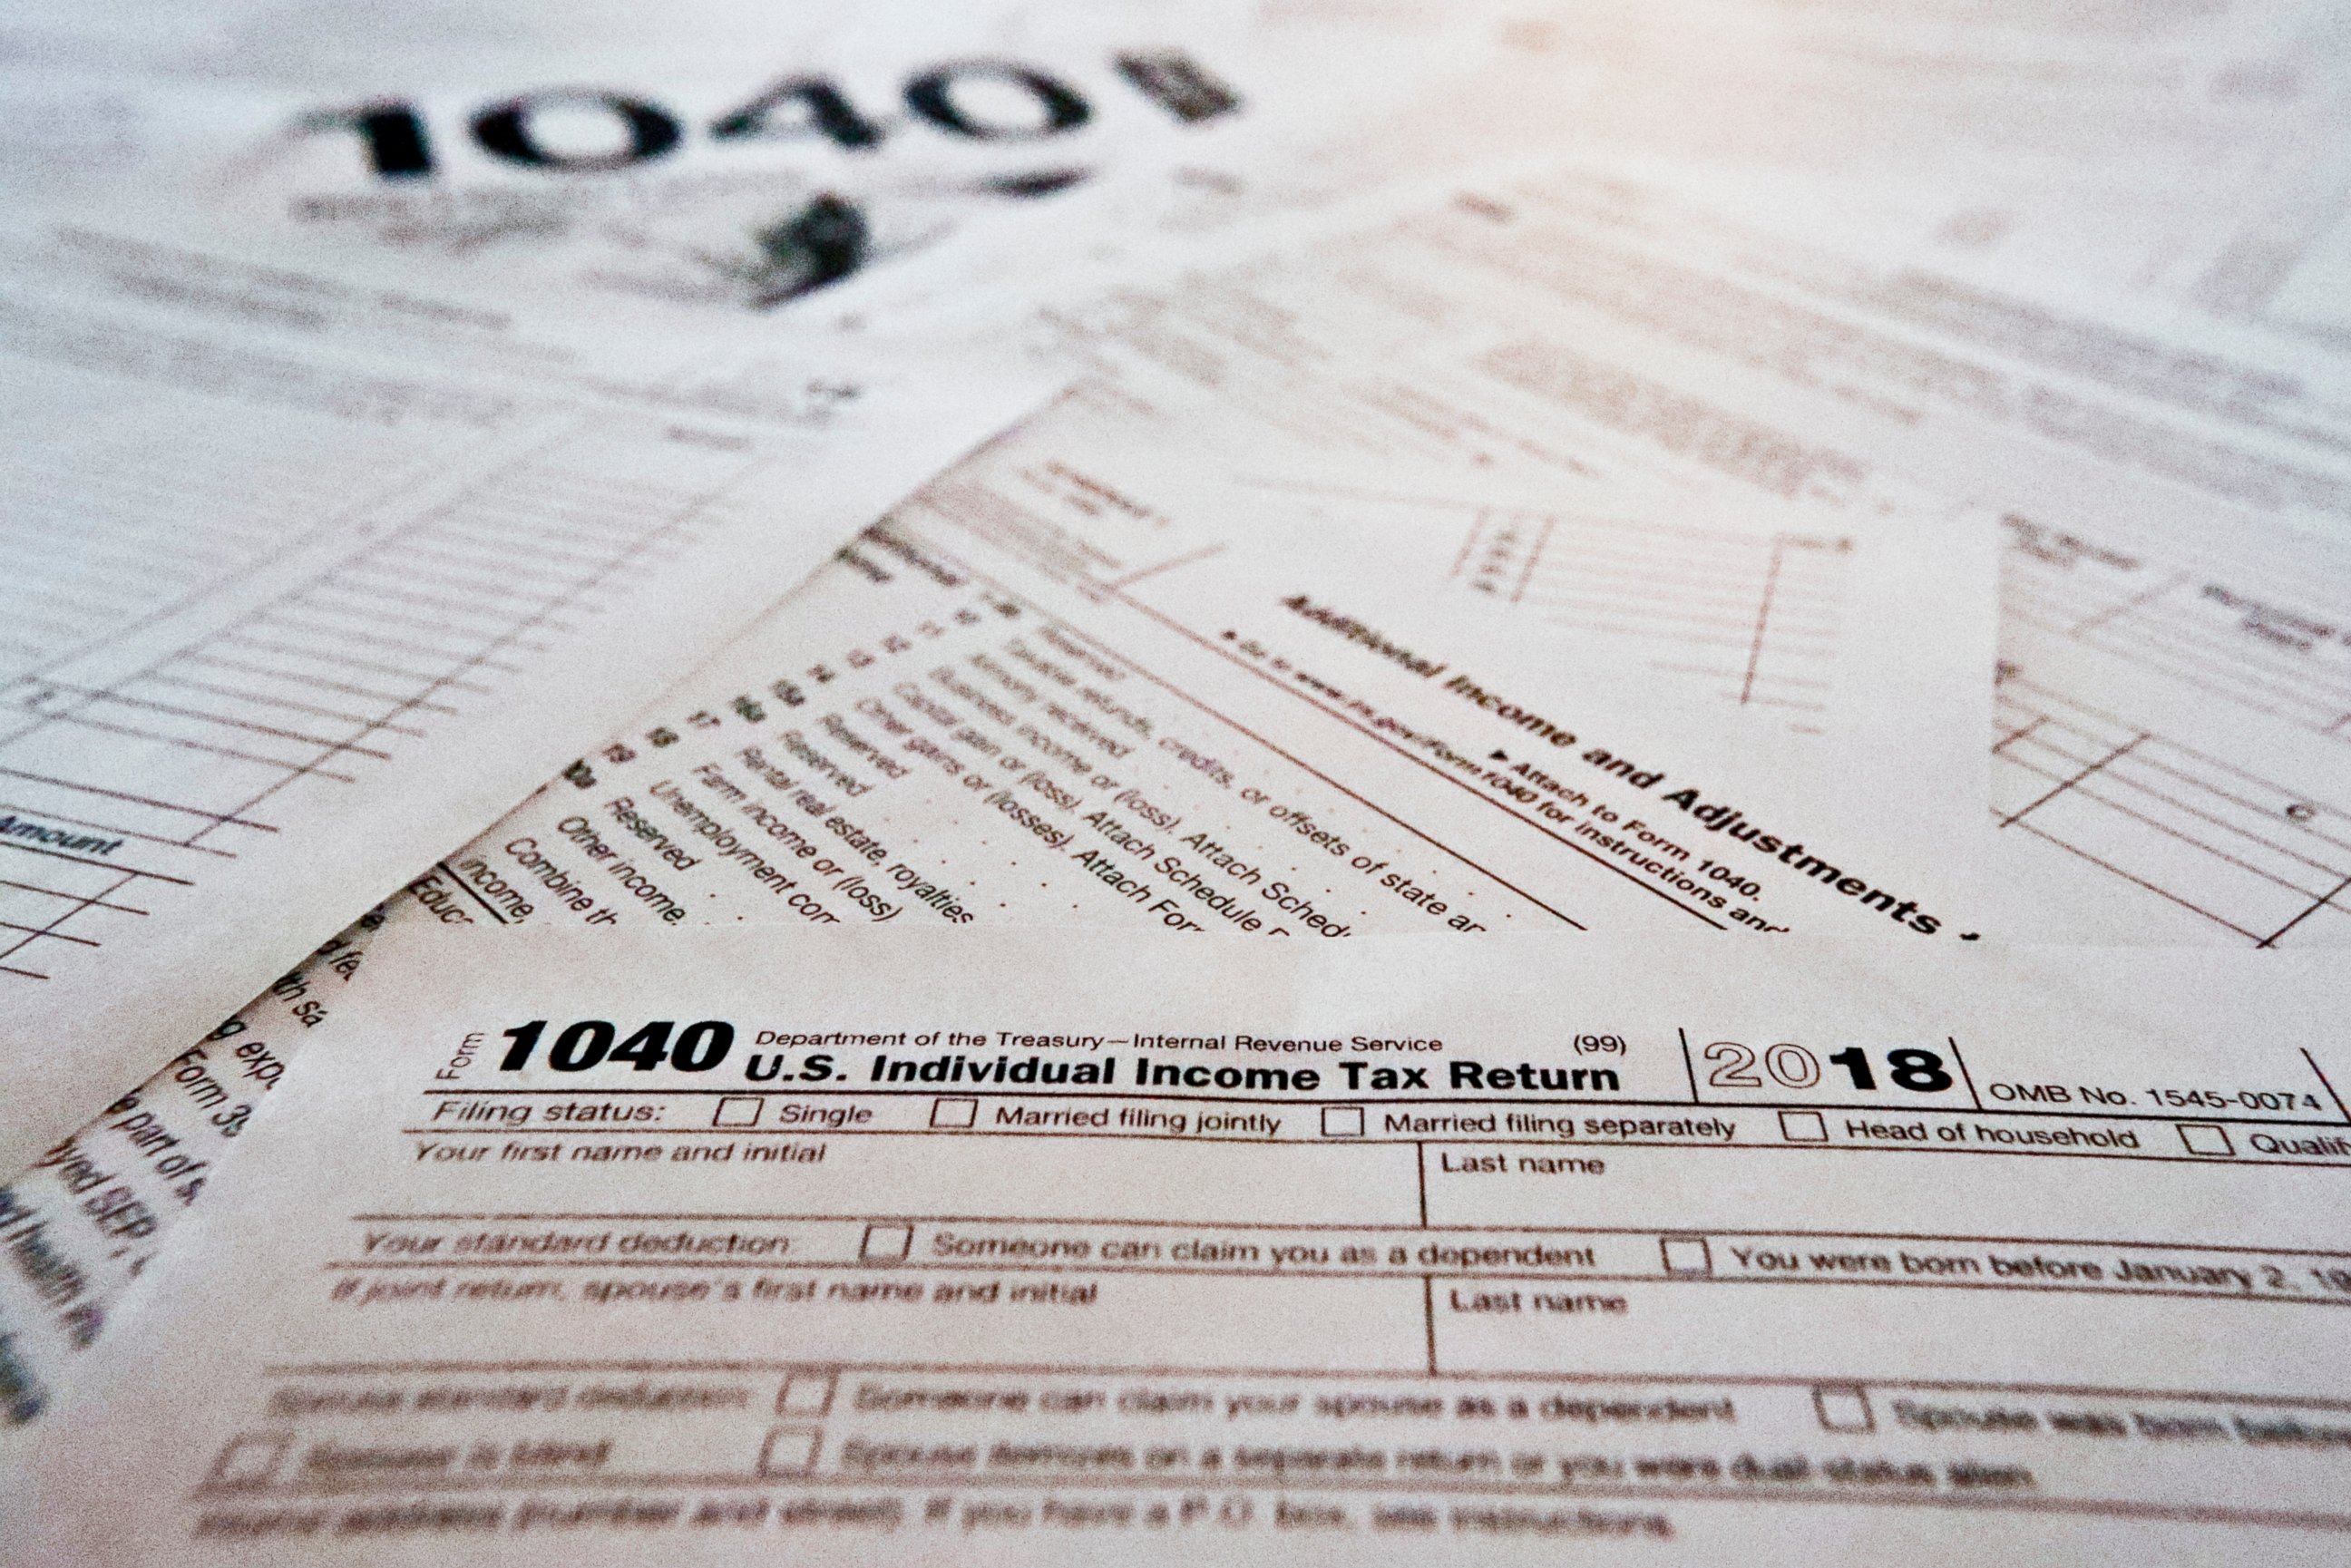 PHOTO: This photo shows multiple forms printed from the Internal Revenue Service web page that are used for 2018 U.S. federal tax returns.